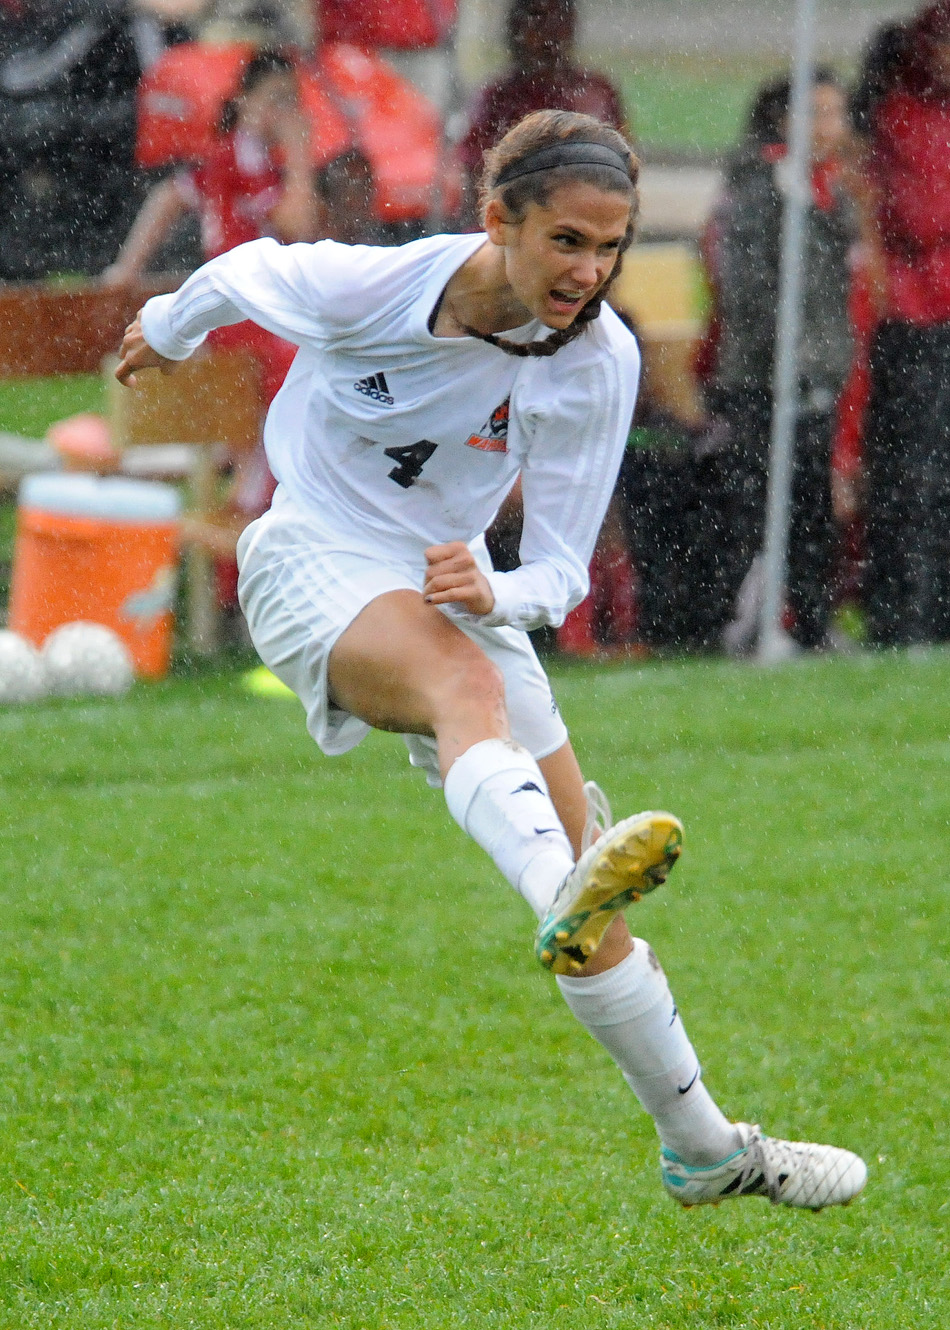 Warsaw's Clair Snodgrass sends in a cross during a heavy downpour in the first half of the semi-final match against Goshen at the Goshen Girls Soccer Regional.